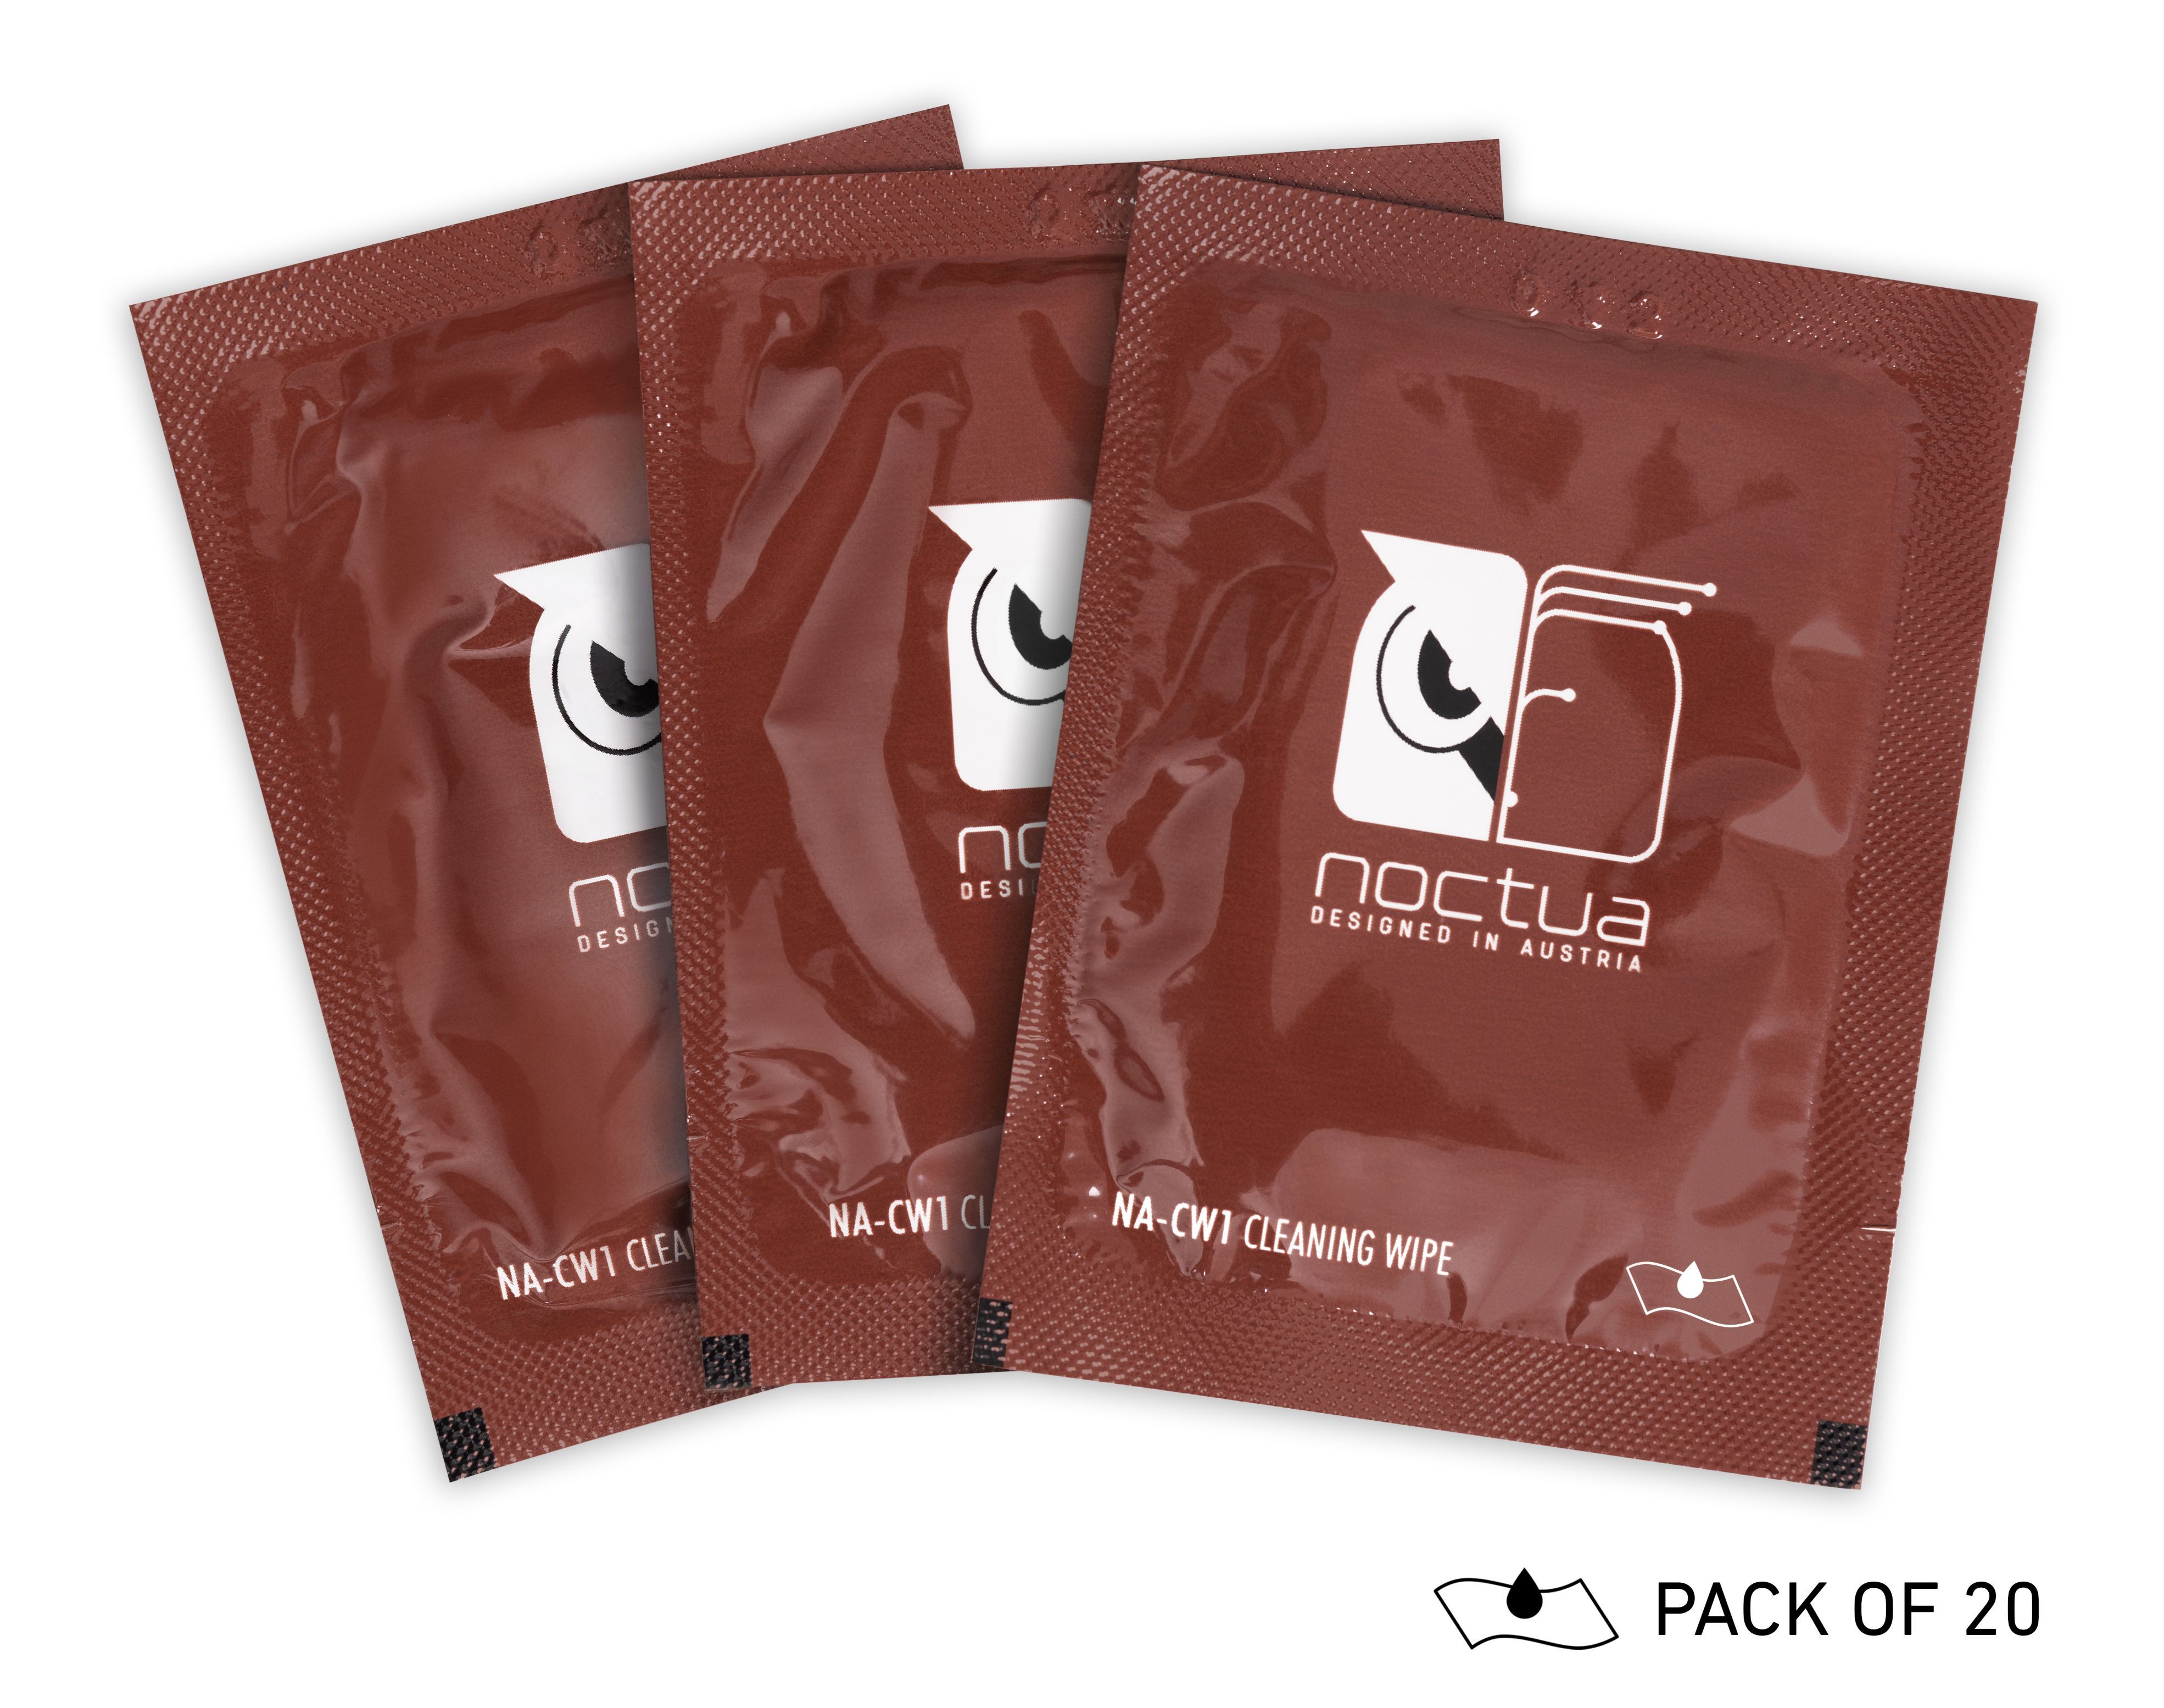 NOCTUA NA-SCW1Cleaning wipes for removing thermal compounds